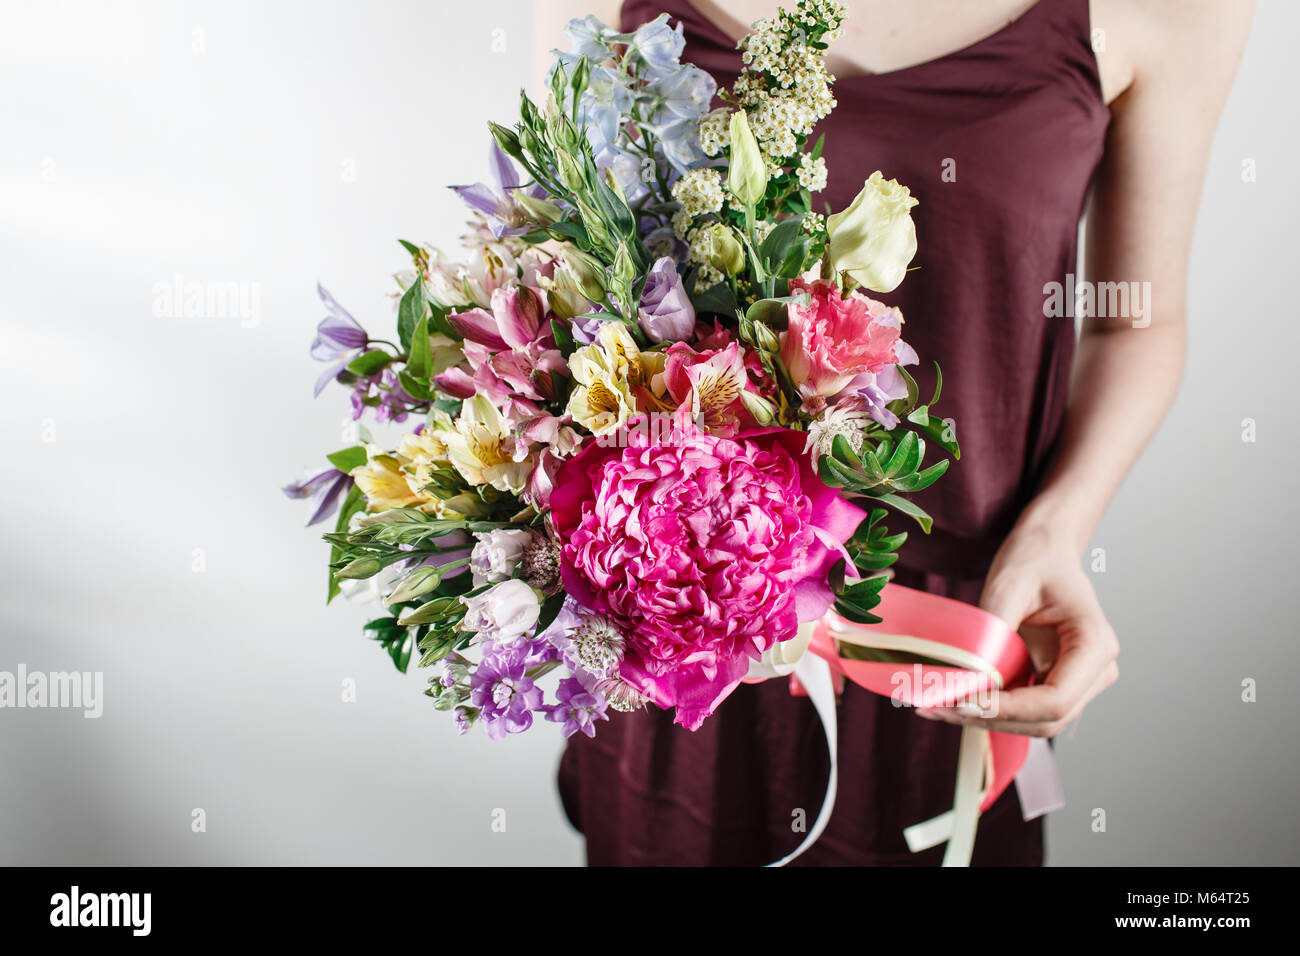 flower composition with peonies. Color pink, green, lavander, blue. beautiful luxury bouquet of mixed flowers in woman hand. the work of the florist at a flower shop Stock Photo